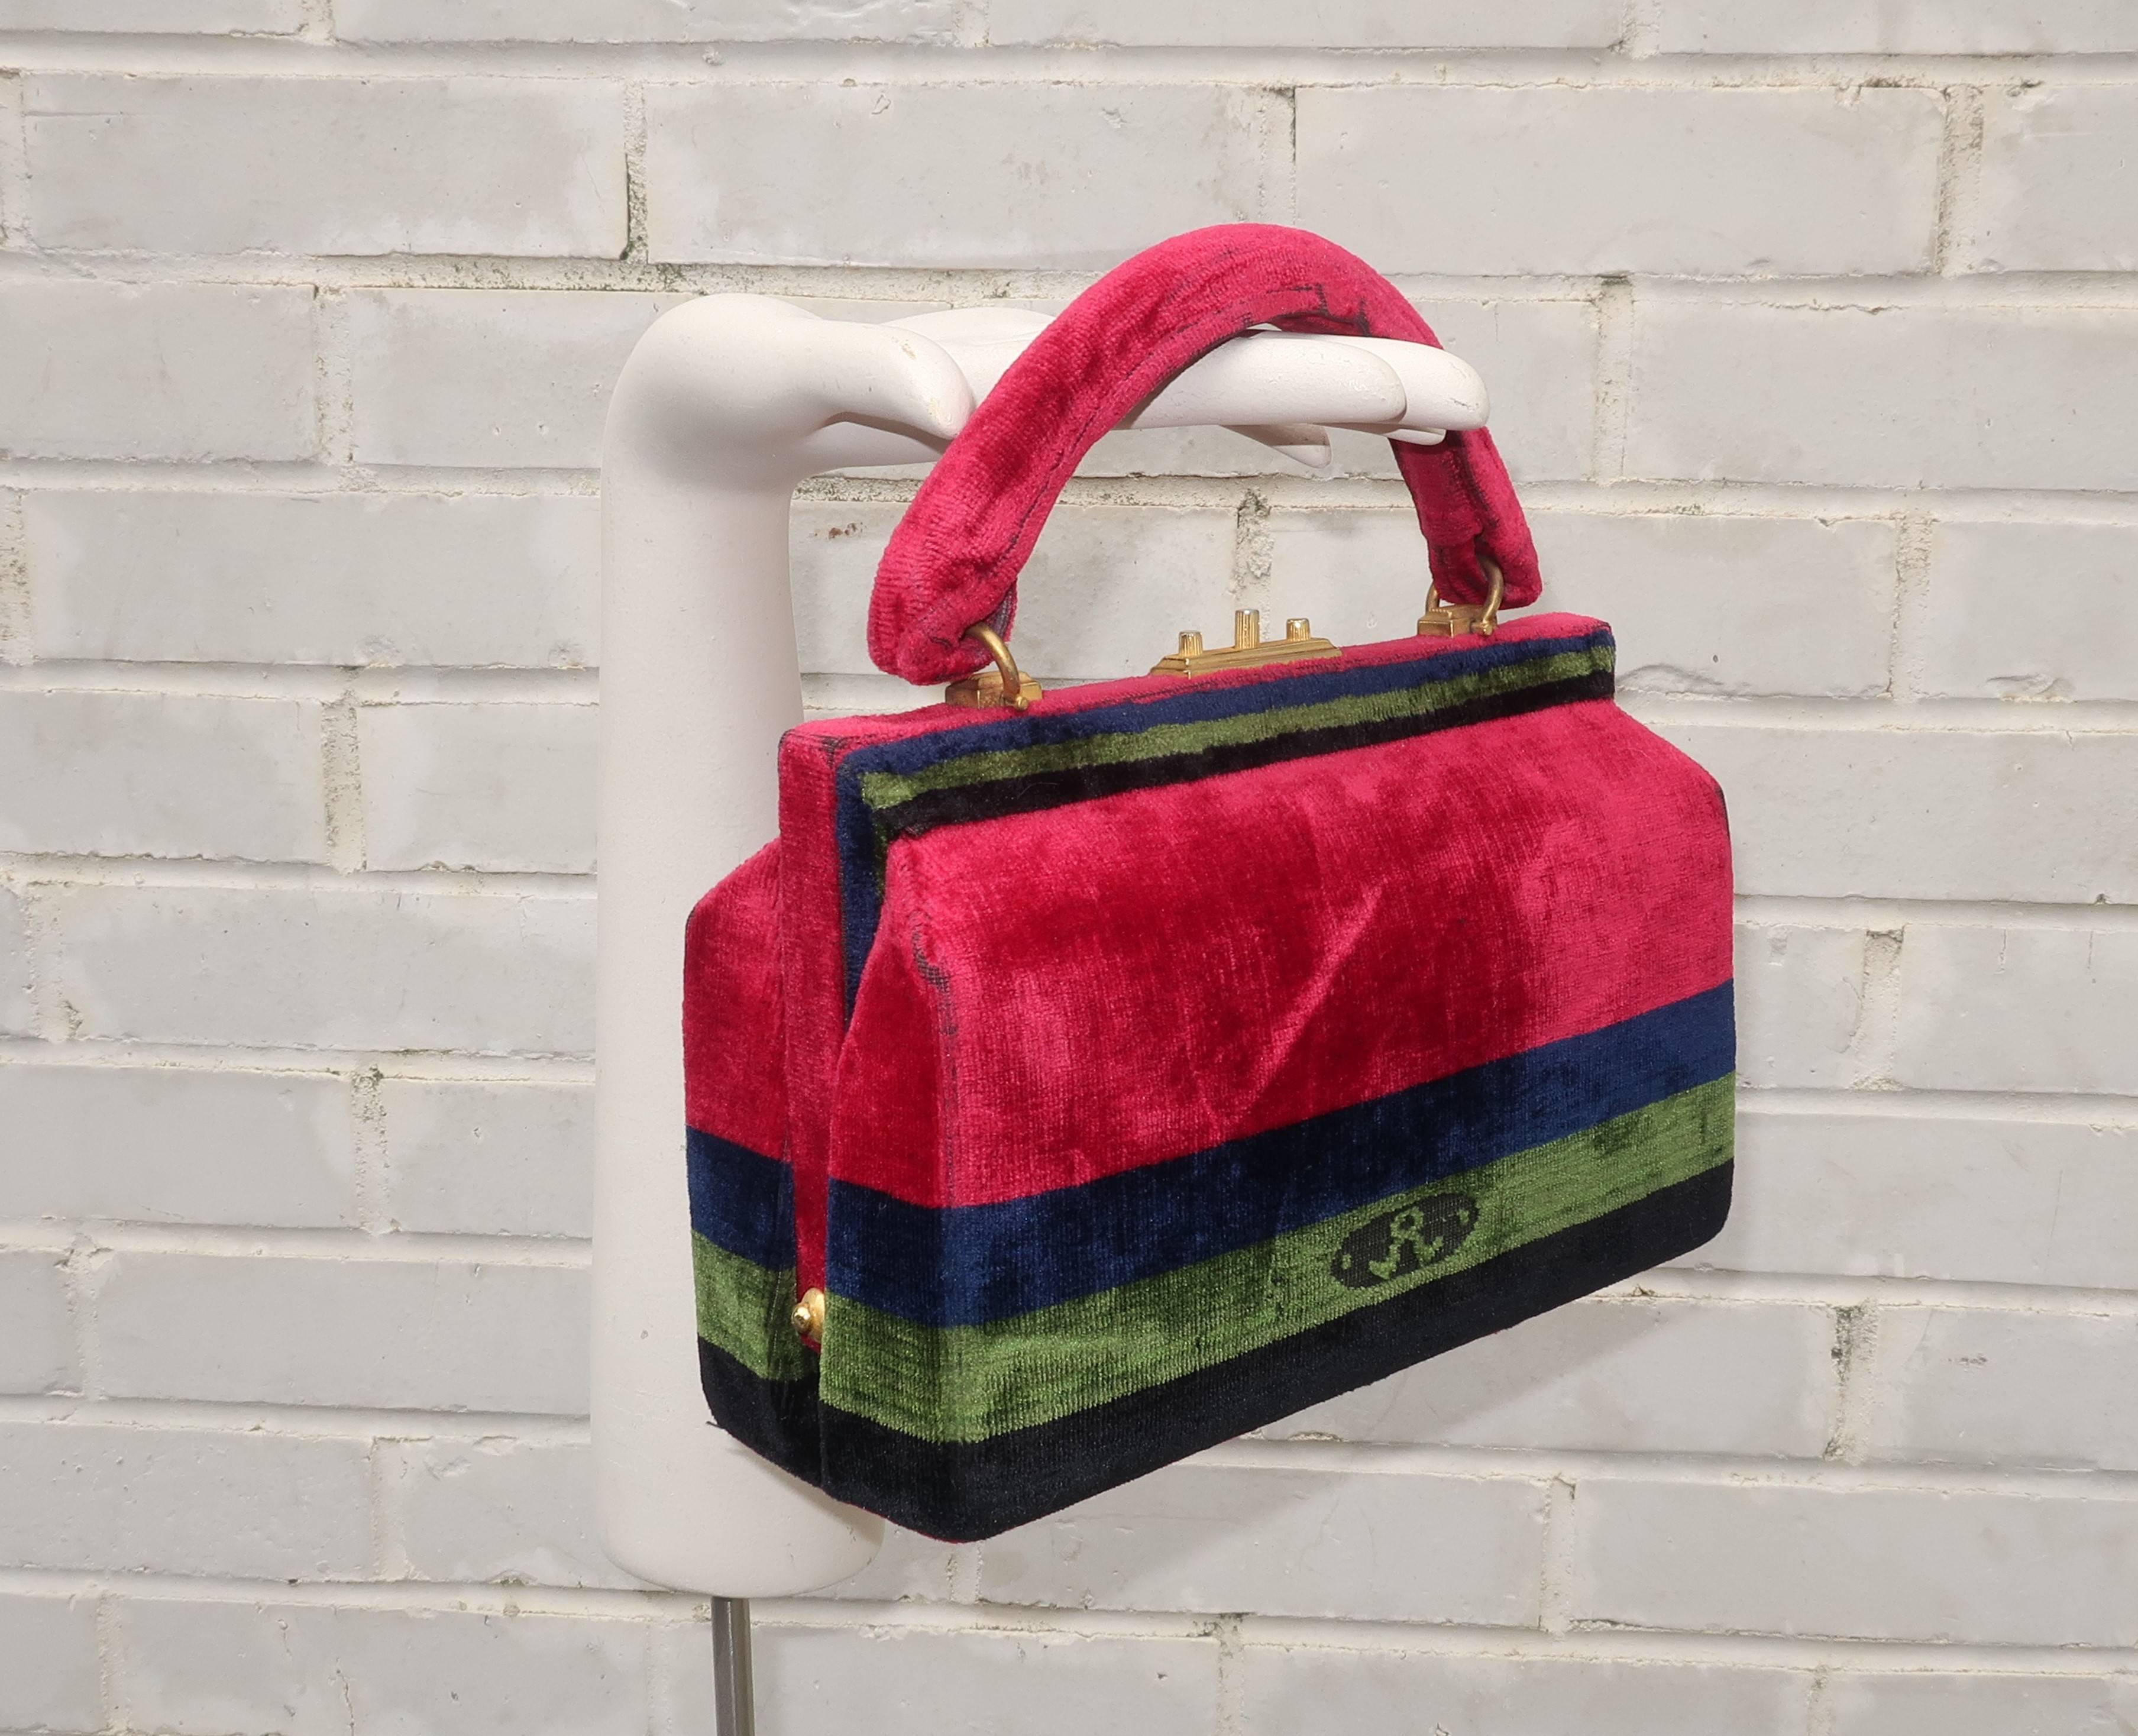 Giuliana Camerino's designs for her label Roberta Di Camerino are precious baubles and the perfect fashion accessory ... each one is like a tactile treasure.  This C.1960 handbag has a petite carpetbag sensibility in a wonderful banded pattern